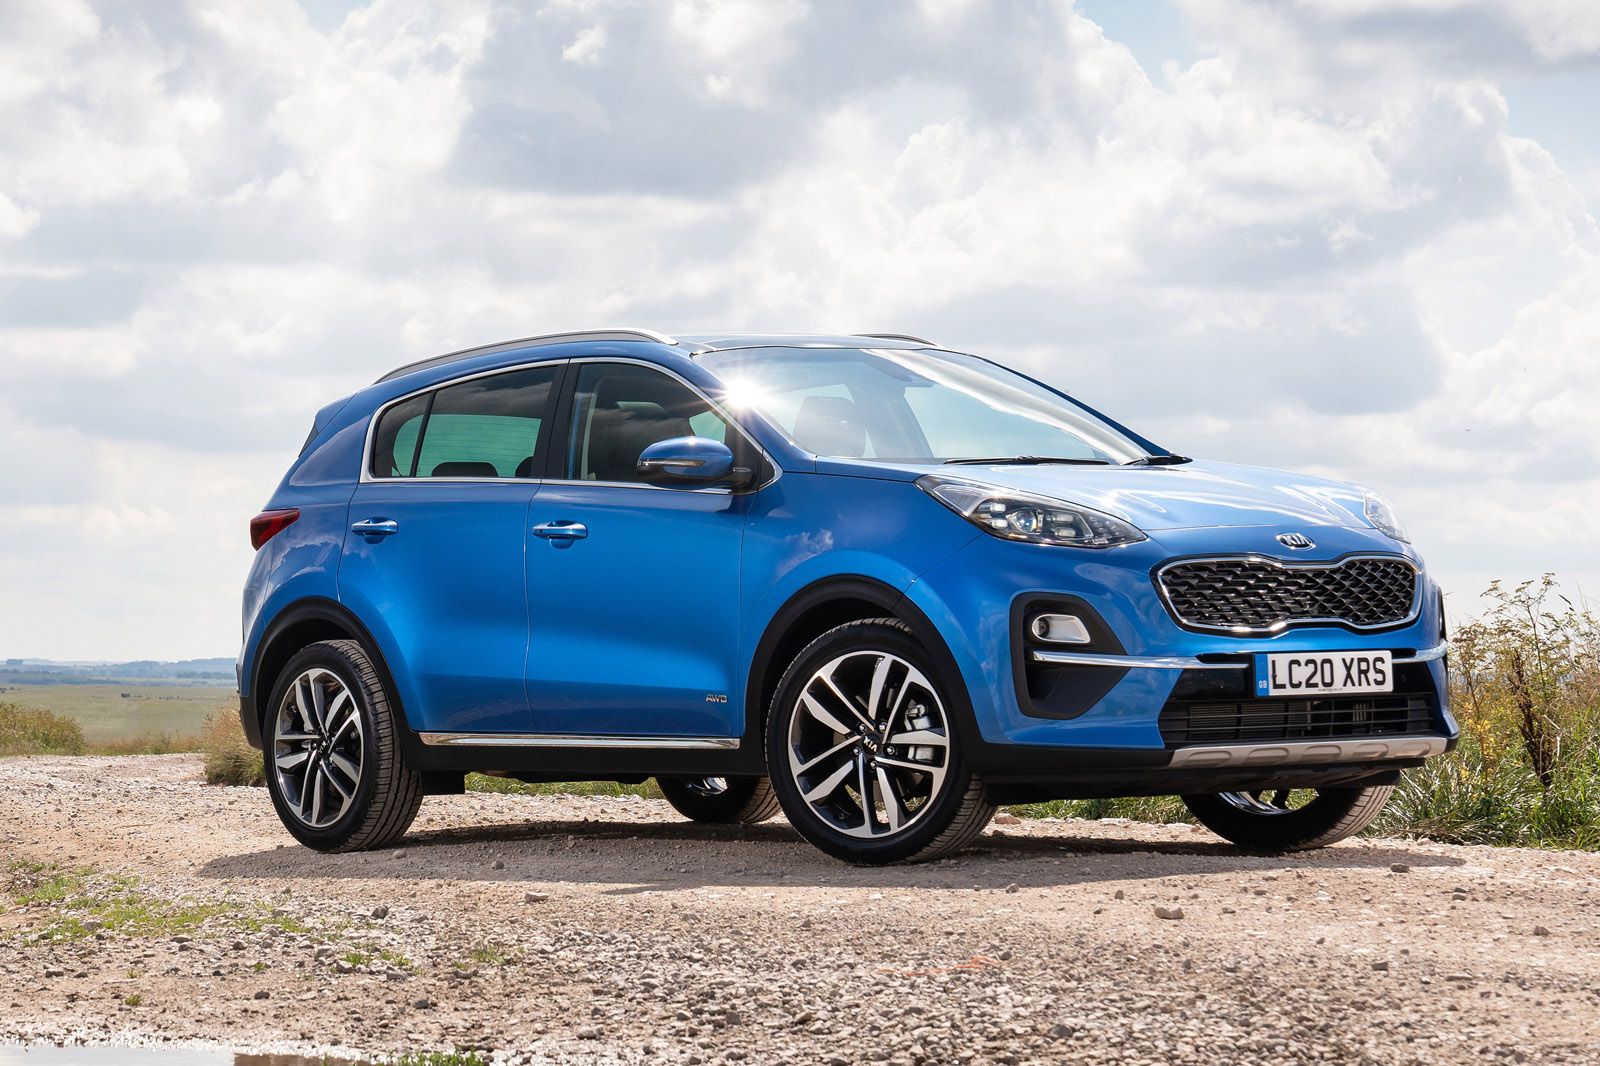 21 Kia Sportage 2020 road test review update static